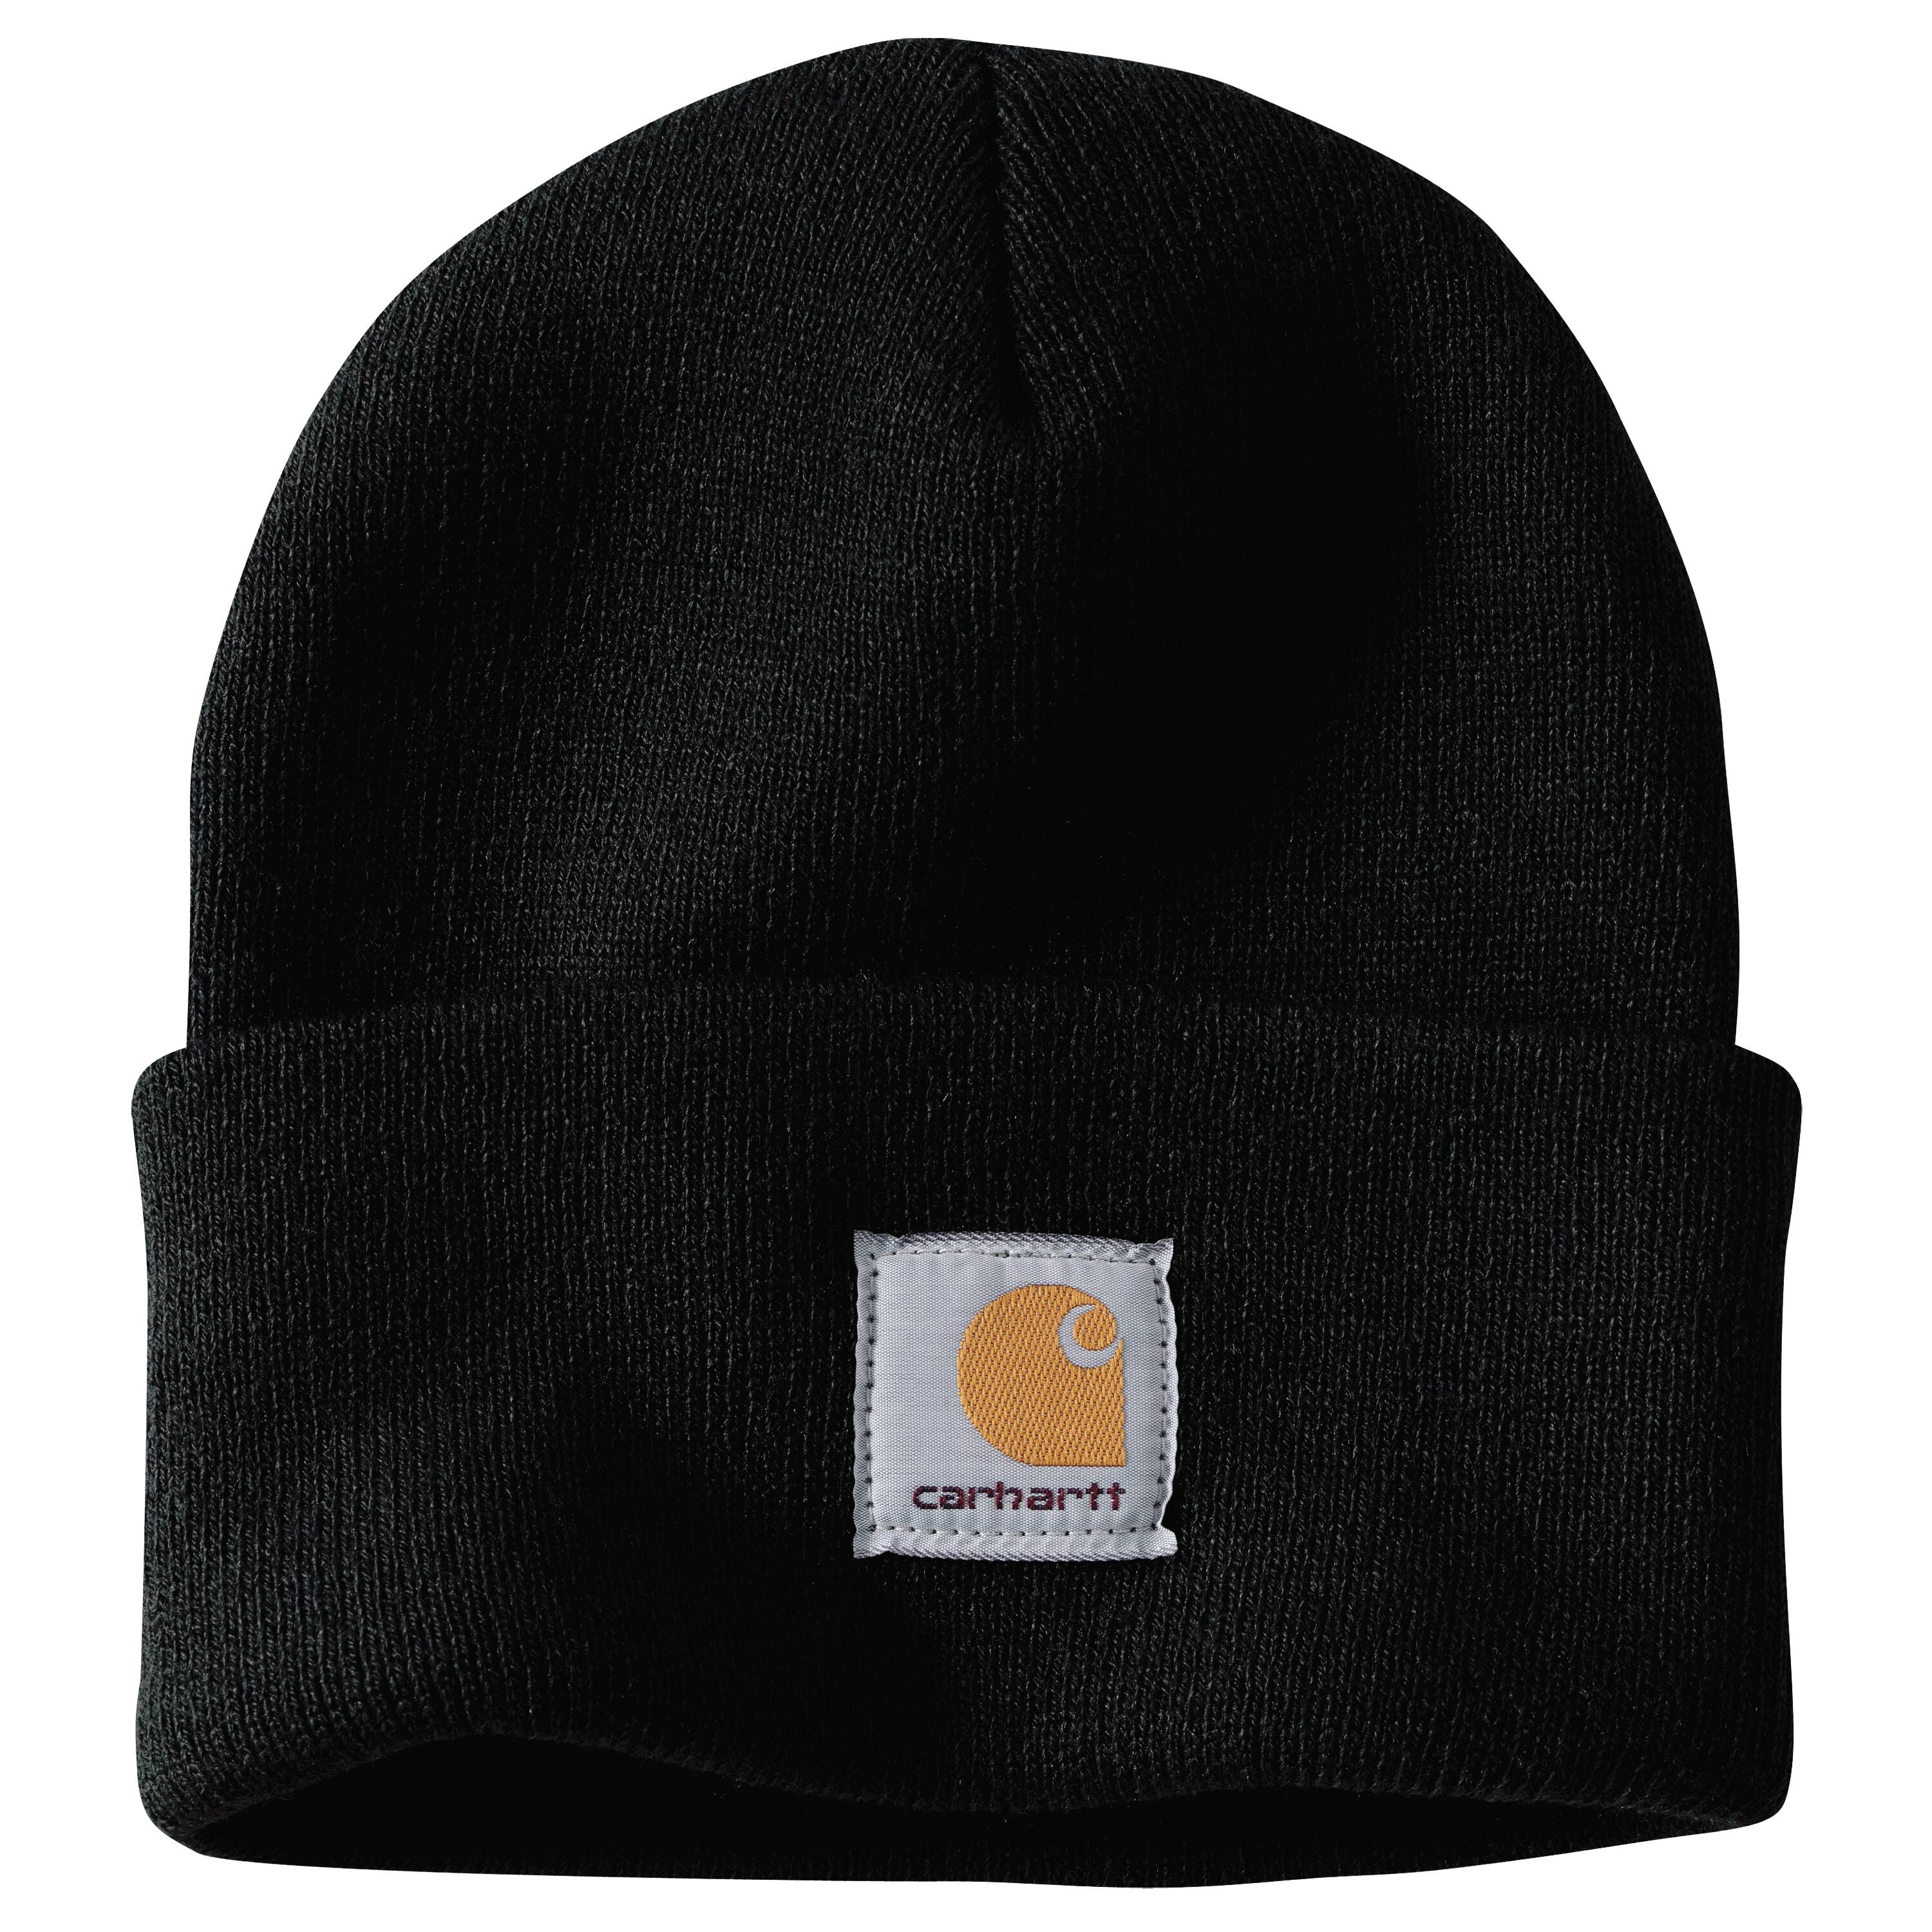 Carhartt Men's Black Knit Hat for Cold Weather, Acrylic Fabric